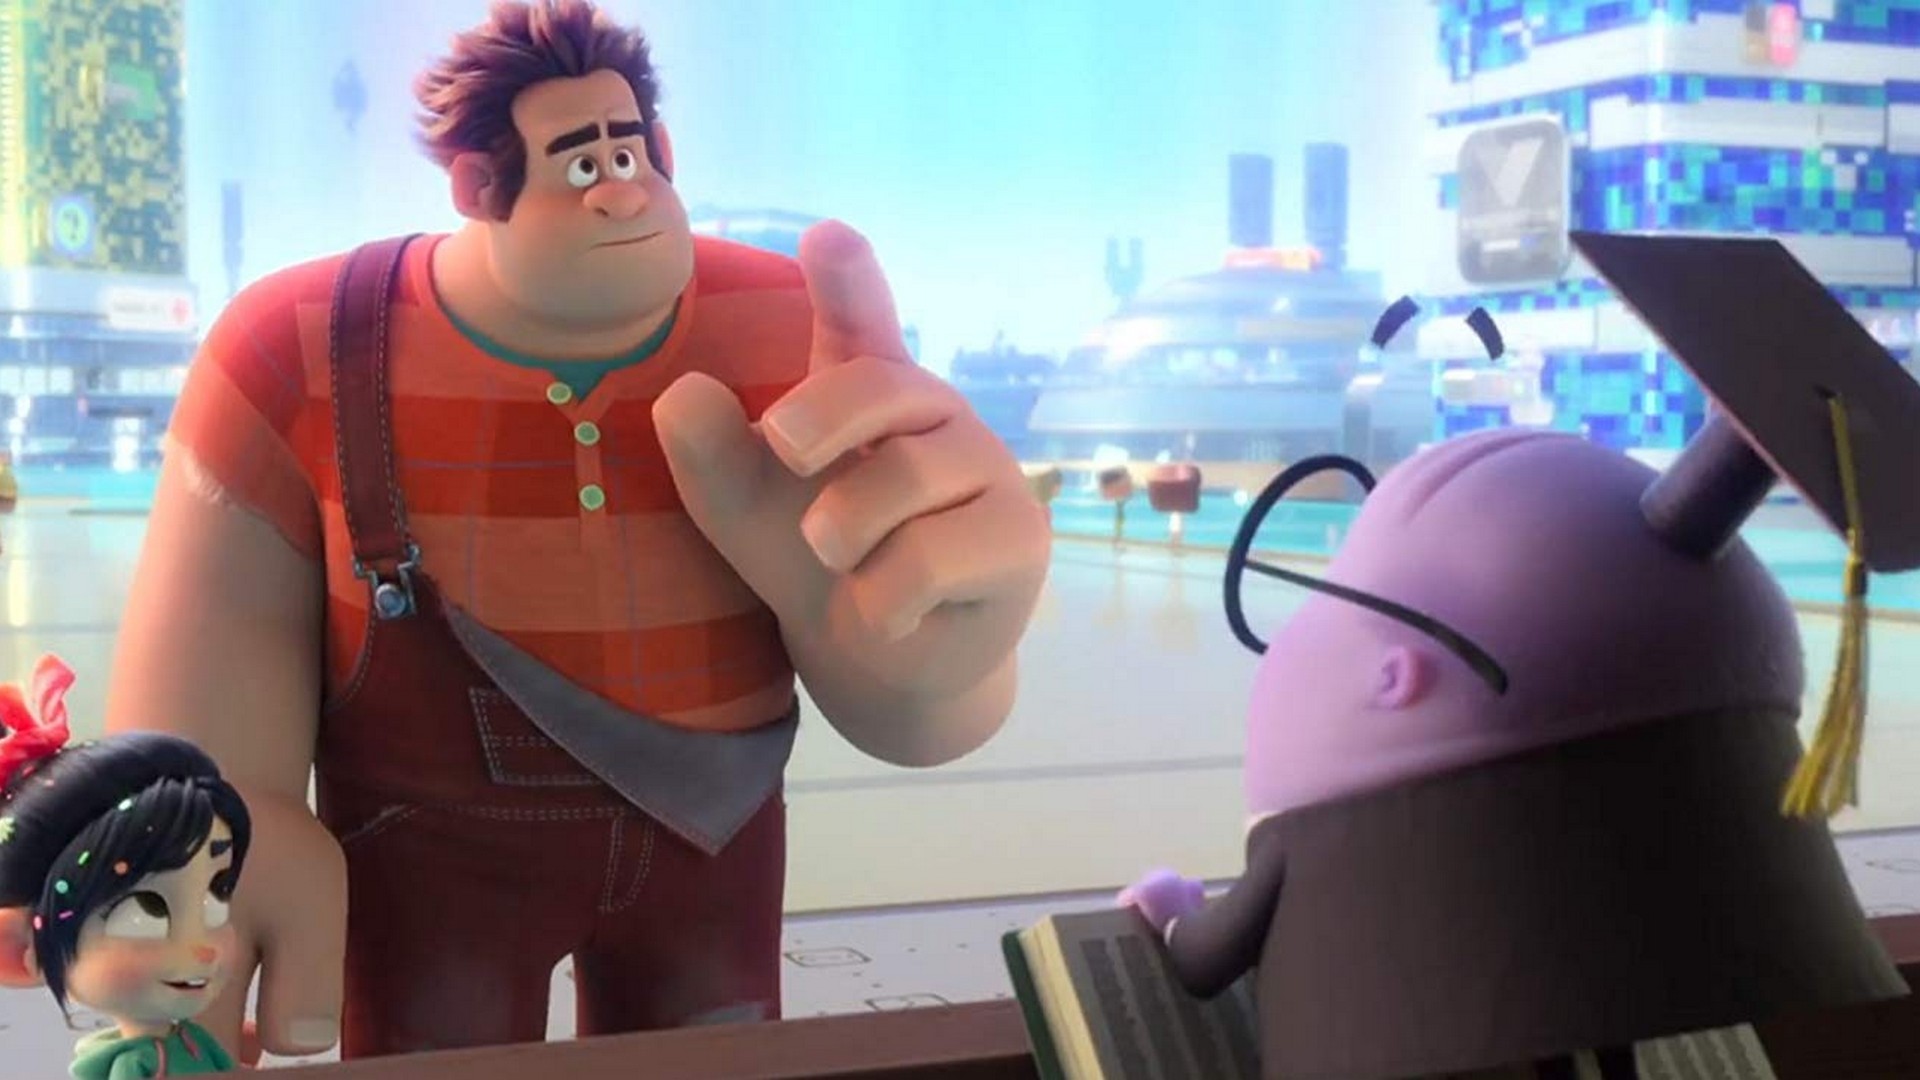 Wreck-It Ralph 2 2018 Wallpaper HD With Resolution 1920X1080 pixel. You can make this wallpaper for your Mac or Windows Desktop Background, iPhone, Android or Tablet and another Smartphone device for free